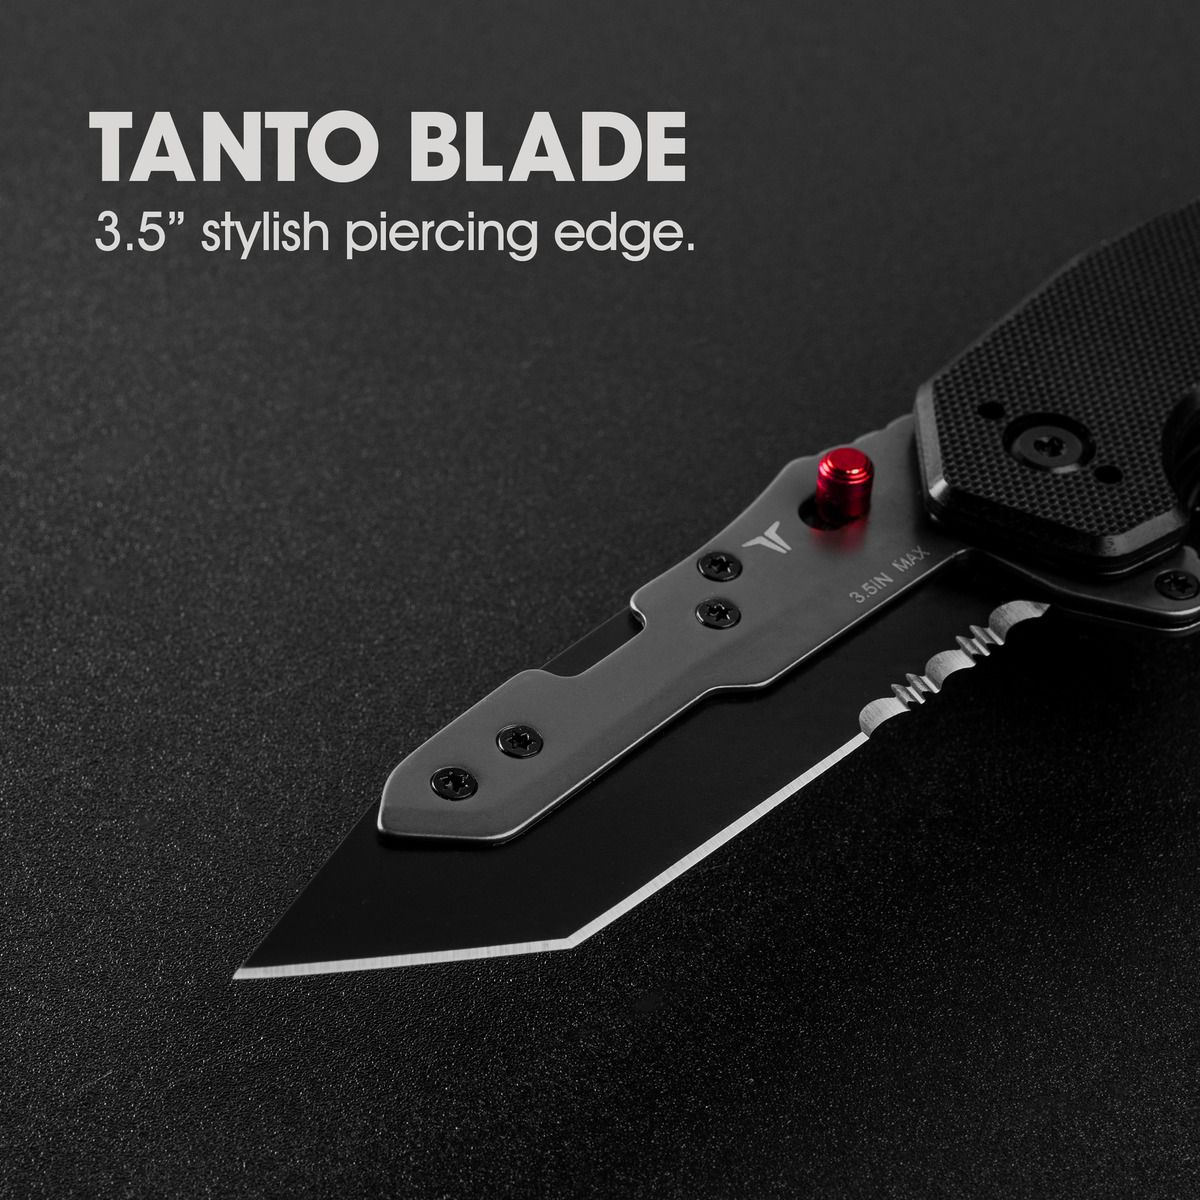 SWIFT EDGE FAST FLIP REPLACEABLE BLADE KNIFE WITH G10 HANDLE - Beacon Laser Creations LLC